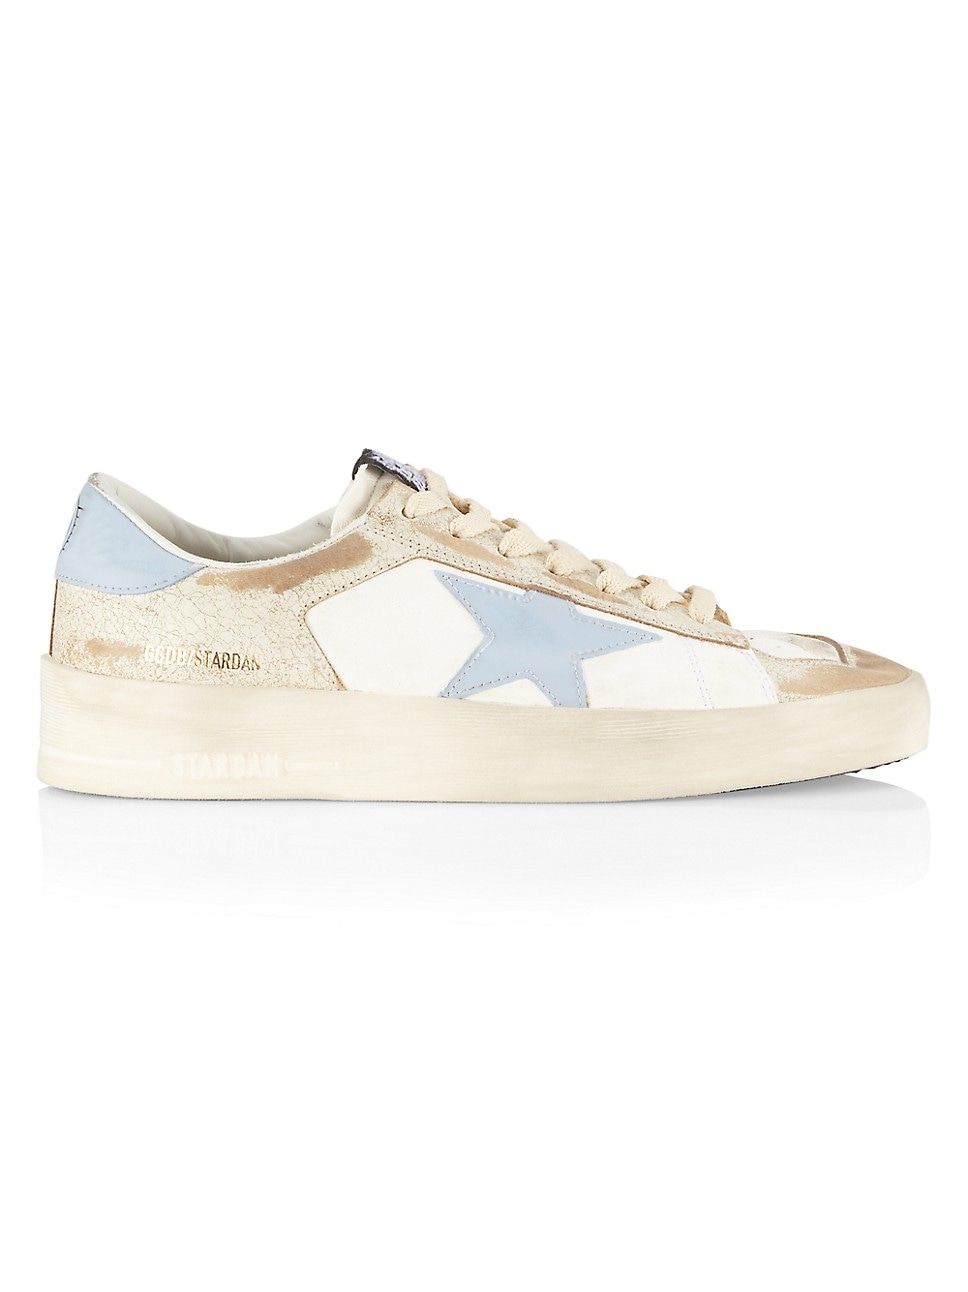 Stardan Distressed Nappa Leather Low-Top Sneakers | Saks Fifth Avenue